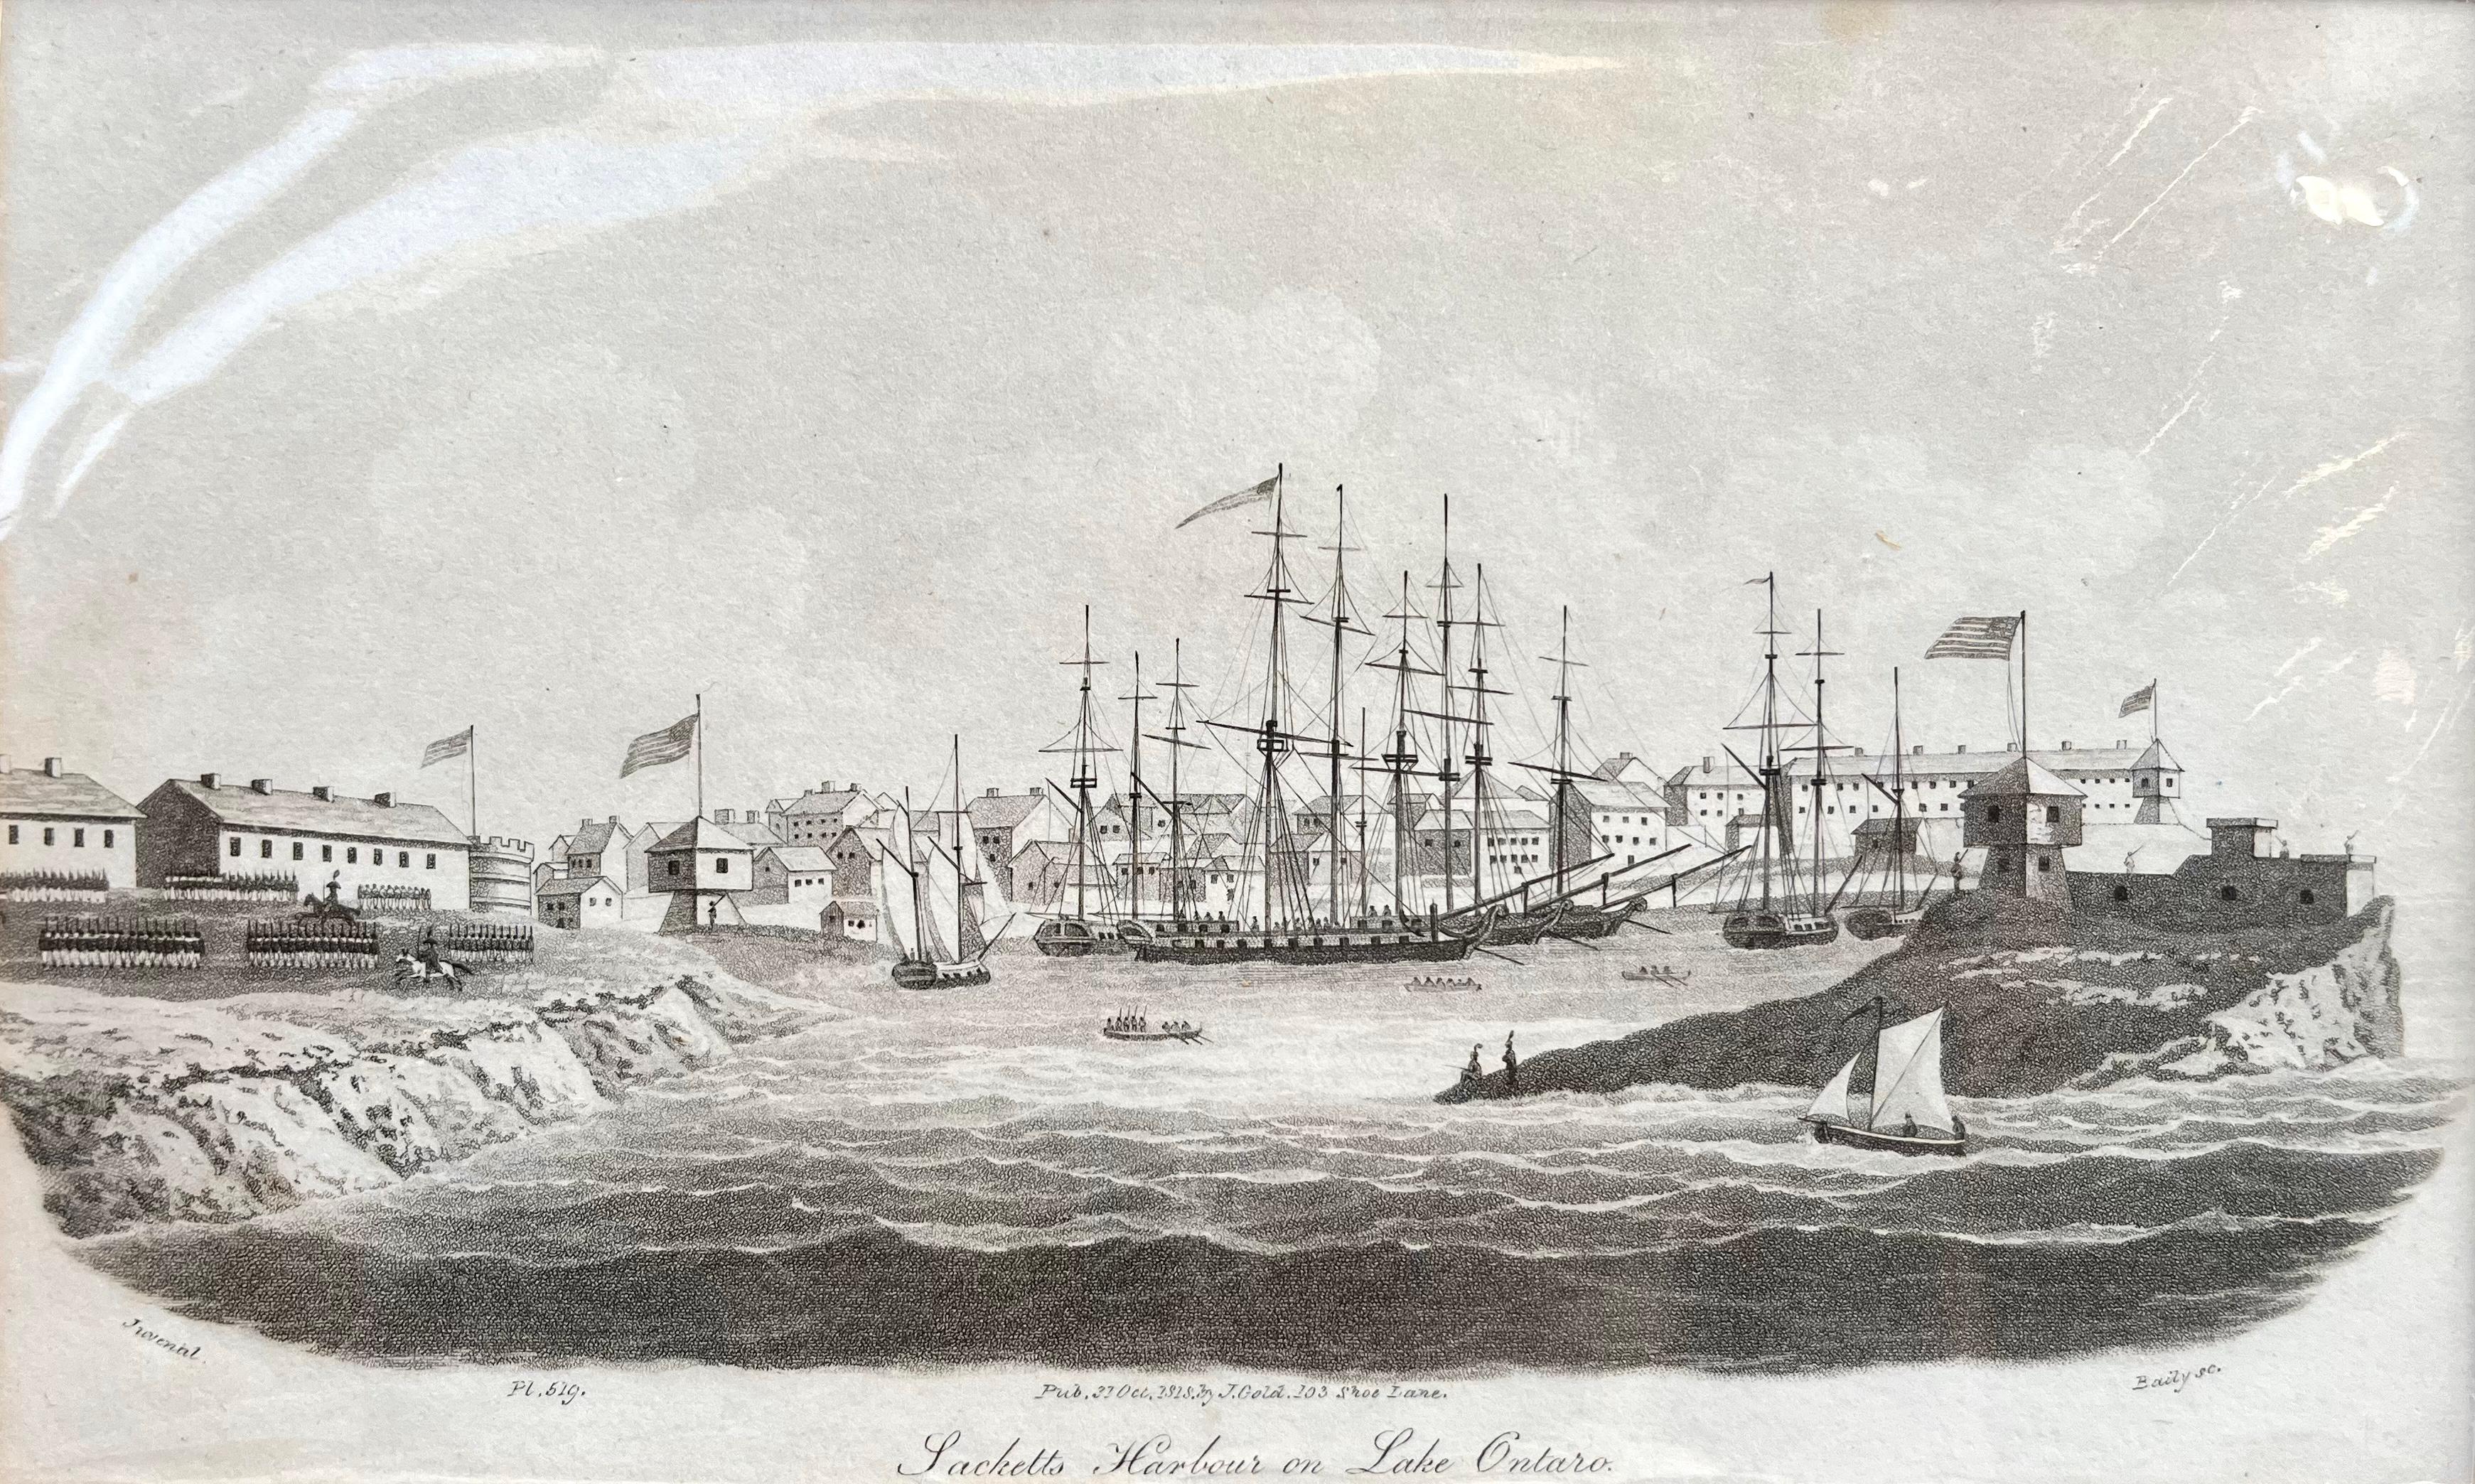 Sacketts Harbour on Lake Ontario. 

Subscript: Lower Left: Juvenal.  Pl. 519.;  Lower Center: Pub. 31 Oct. 1818 by J. Gold, 103 Shoe Lane;  Lower Right: Baily, sc.

Publication: Naval Chronicle

Publisher: J. Gold

Place of Publication: